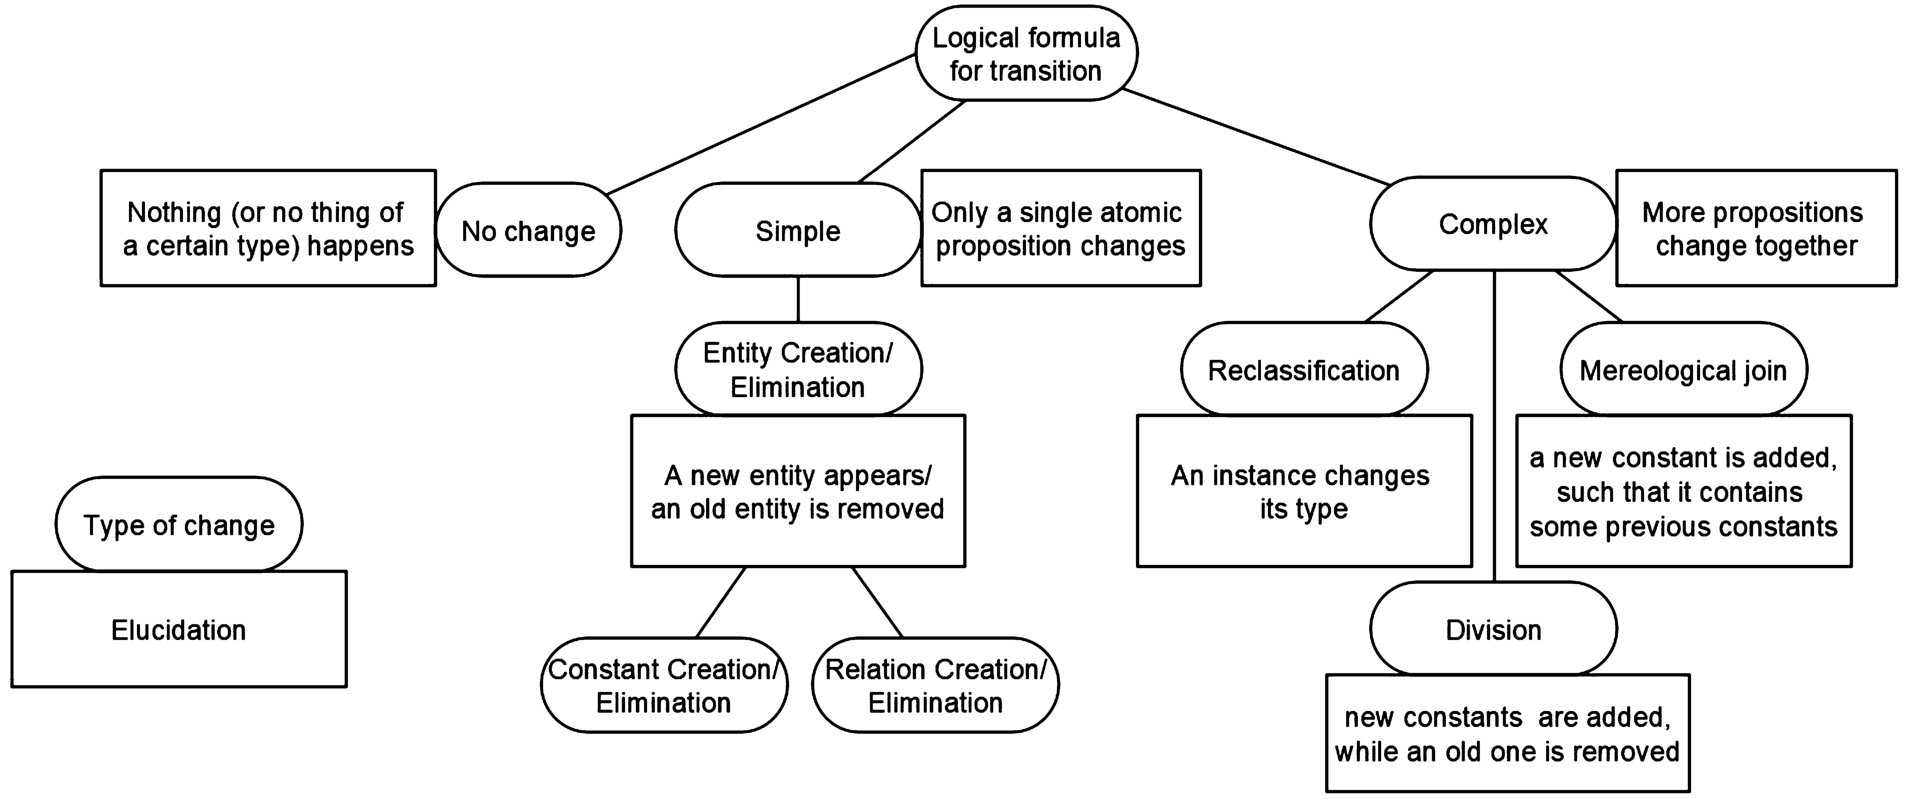 A non exhaustive taxonomy of the logical formulas describing changes between states, classified depending on what predicates differ between the initial and final states.